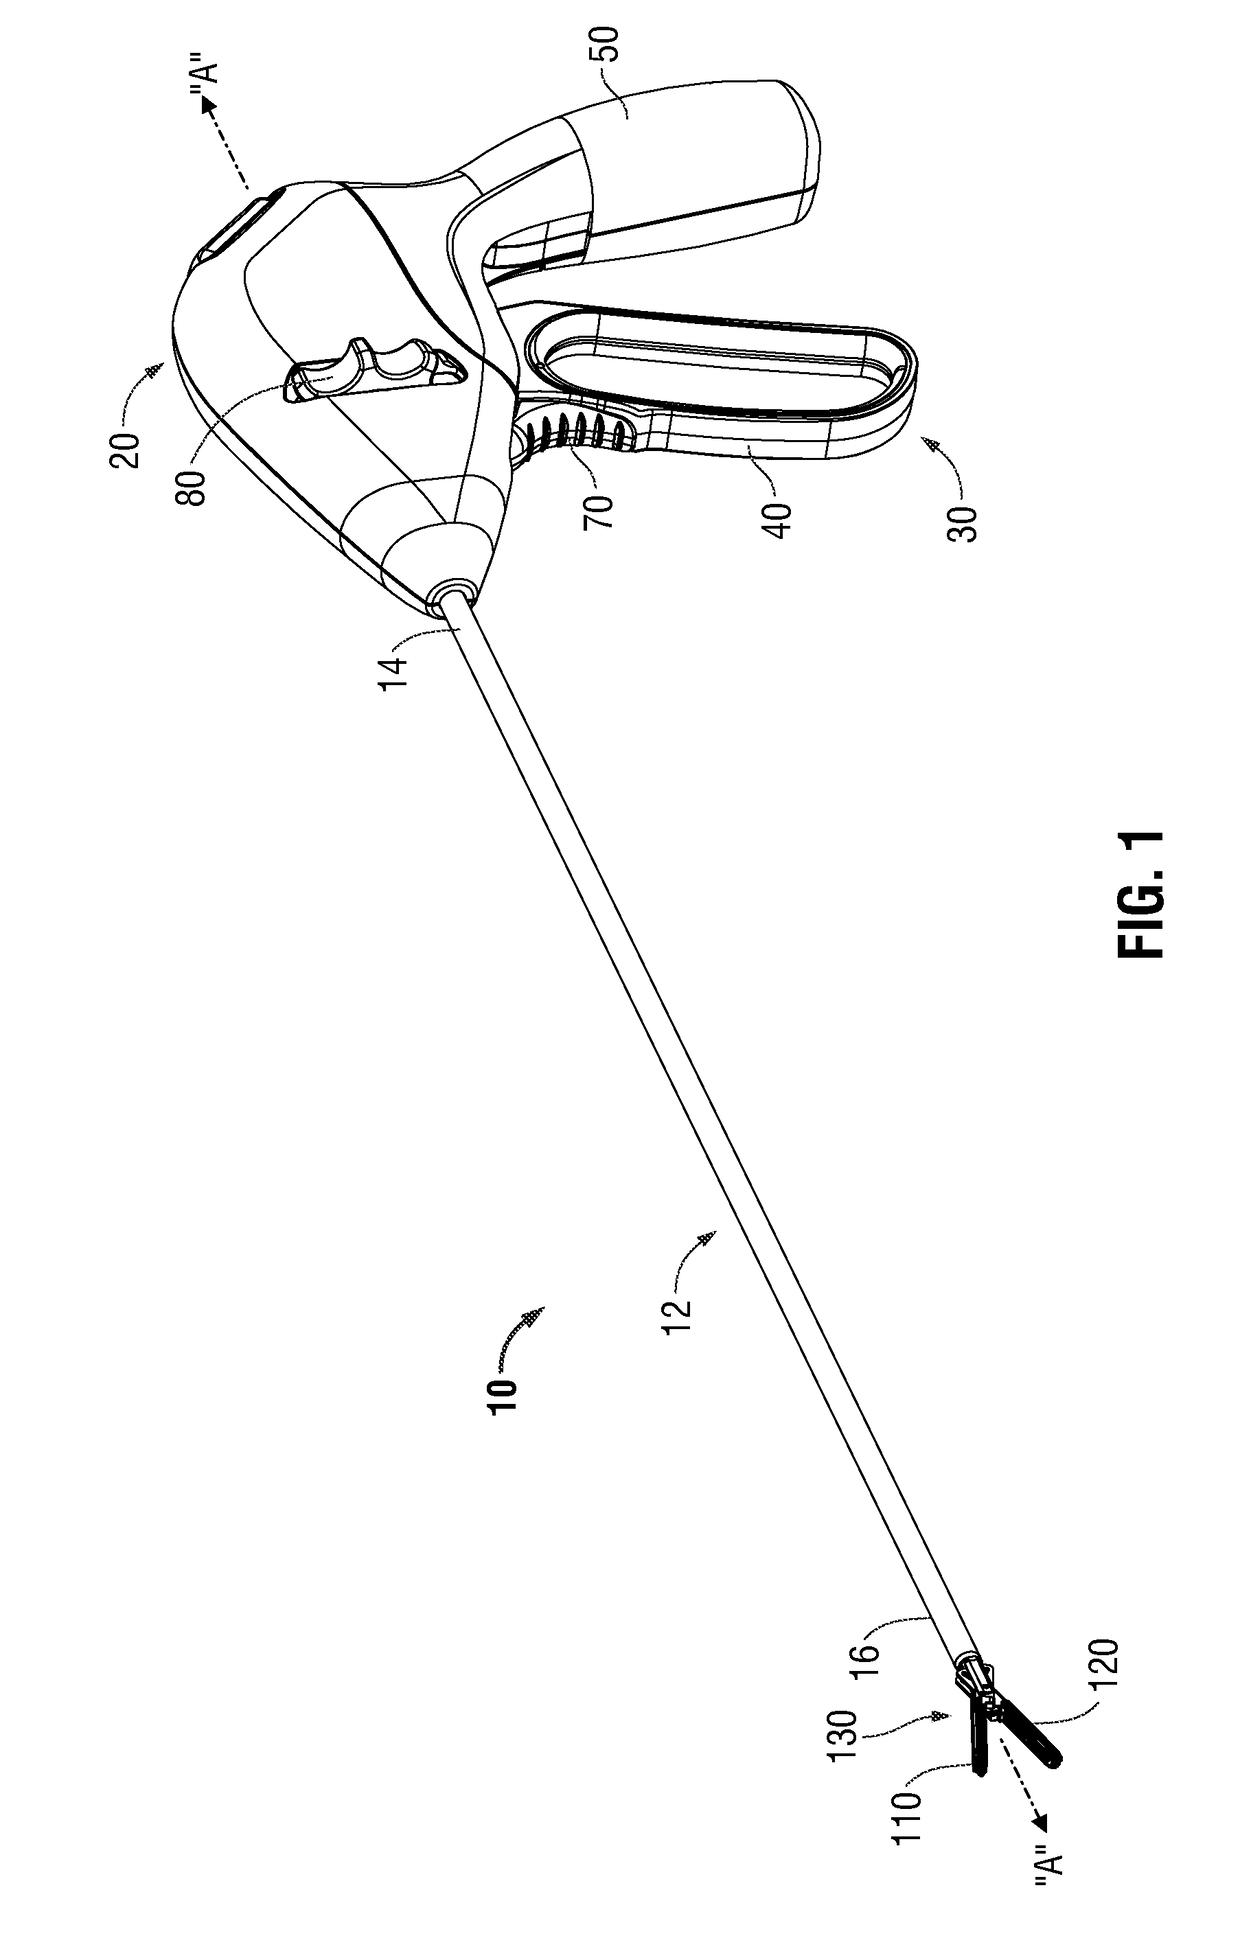 Non-stick coated electrosurgical instruments and method for manufacturing the same